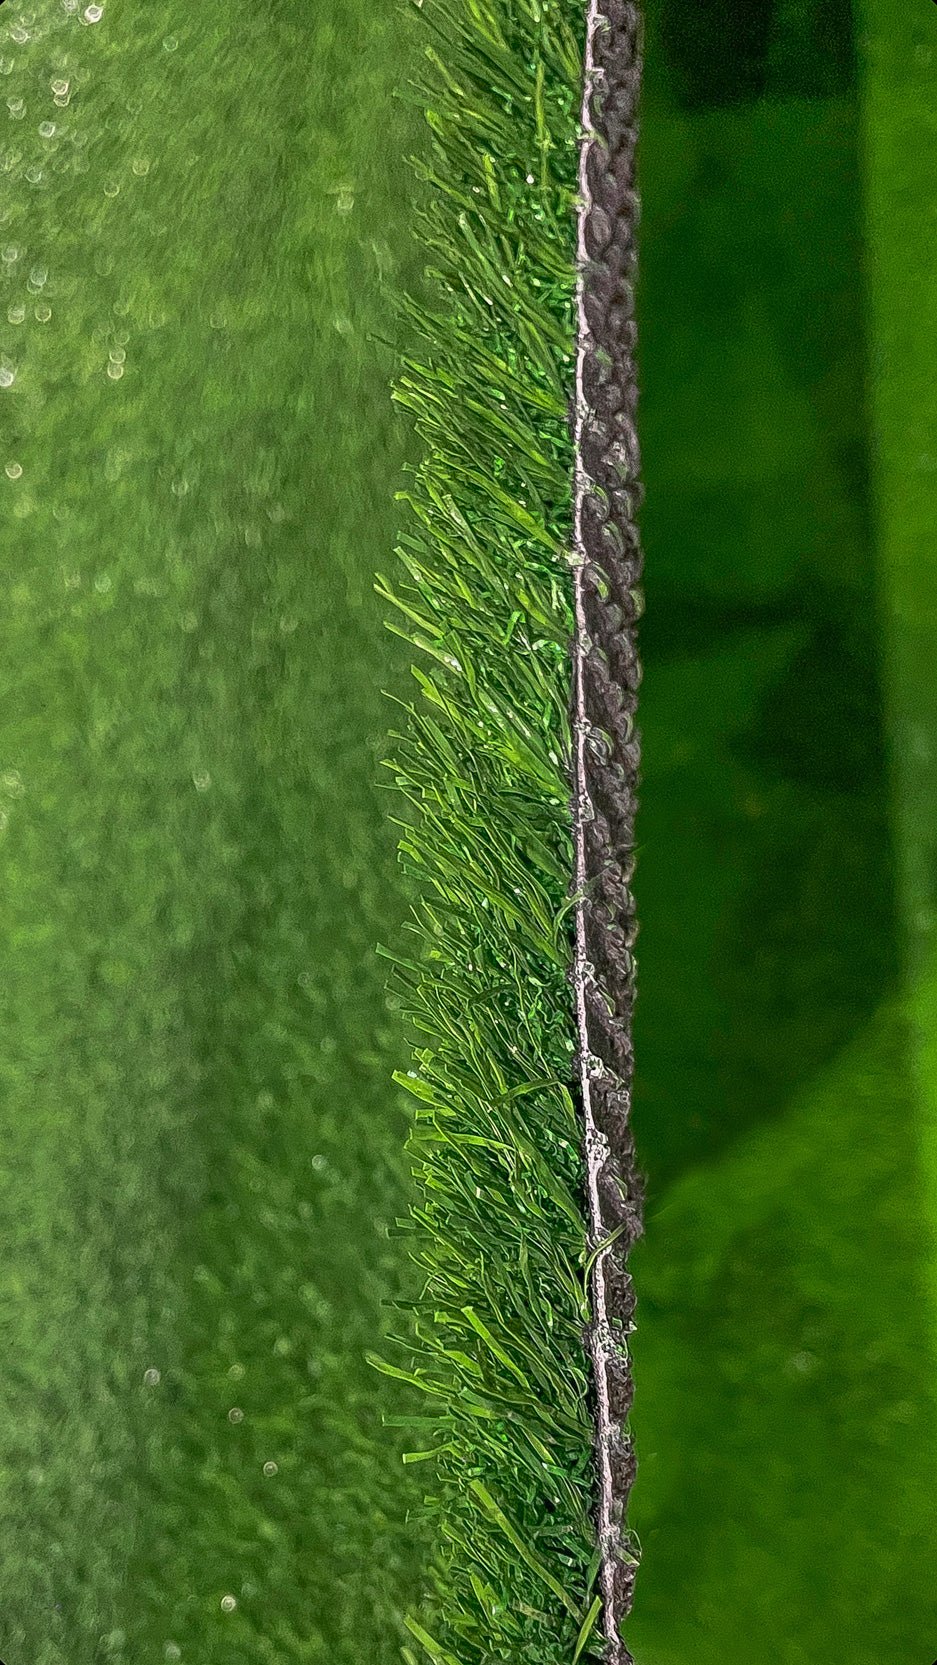 30 MM Grass Switzerland Artificial Grass for Indoor and Outdoor Use, Soft and Lush Natural Looking - V Surfaces